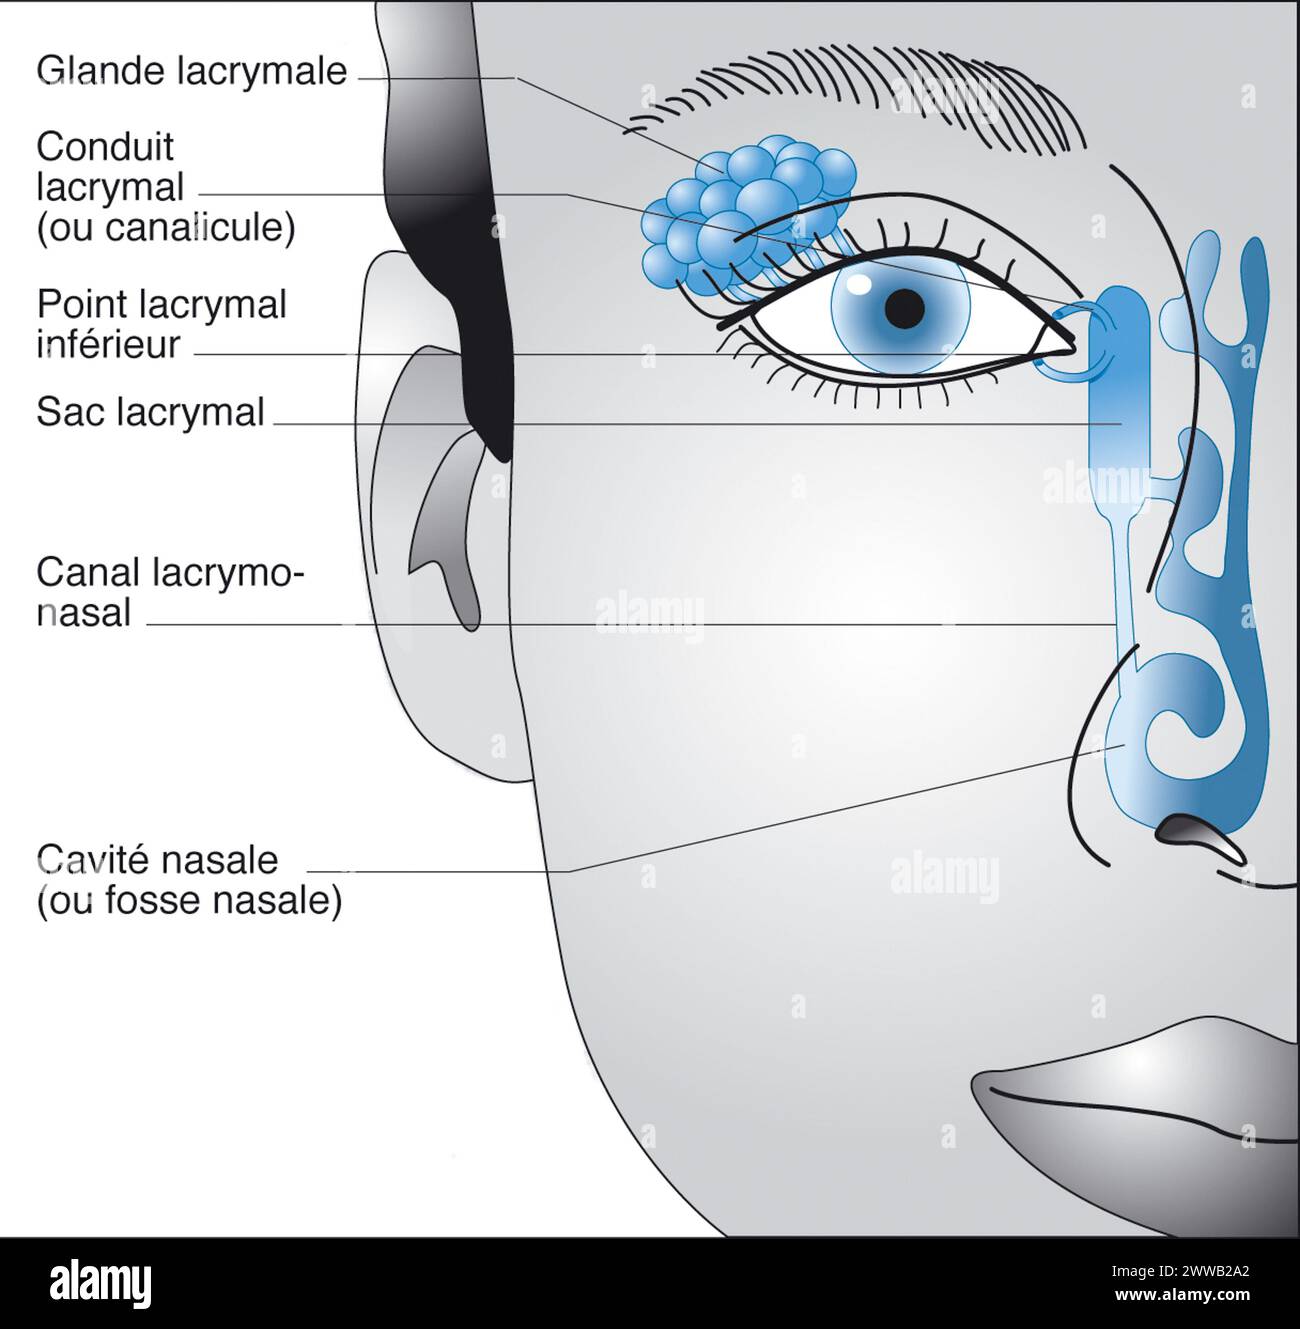 The lacrimal passages. Transparency representation of the lacrimal passages and the communication between them and the nasal passages. Stock Photo